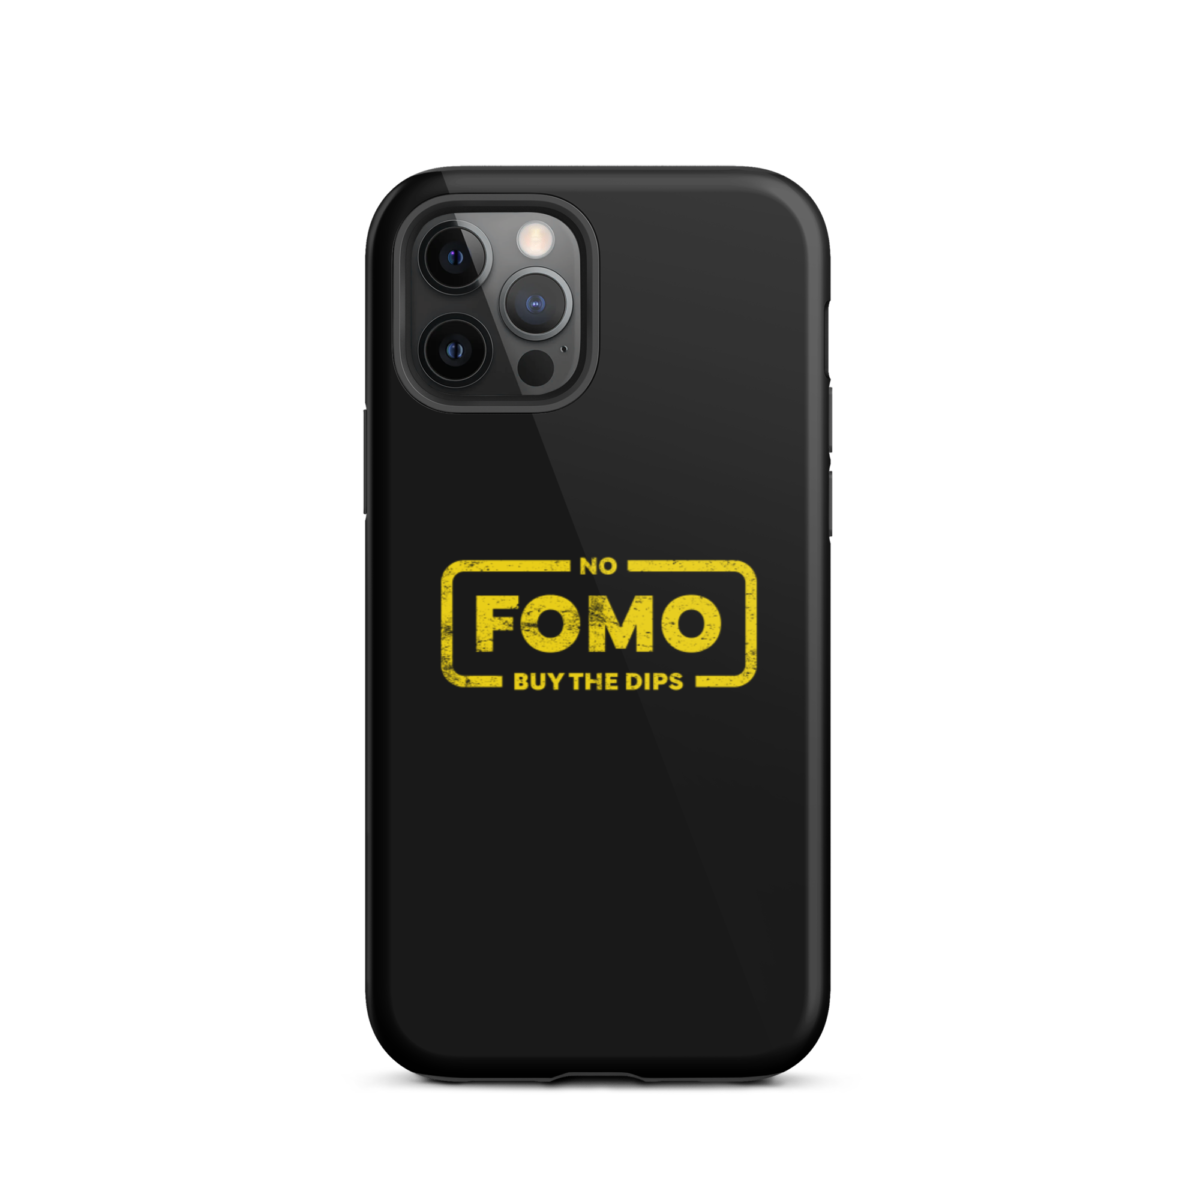 tough iphone case glossy iphone 12 pro front 6397c093bb1a7 - NO FOMO: Buy The Dips Tough iPhone Case